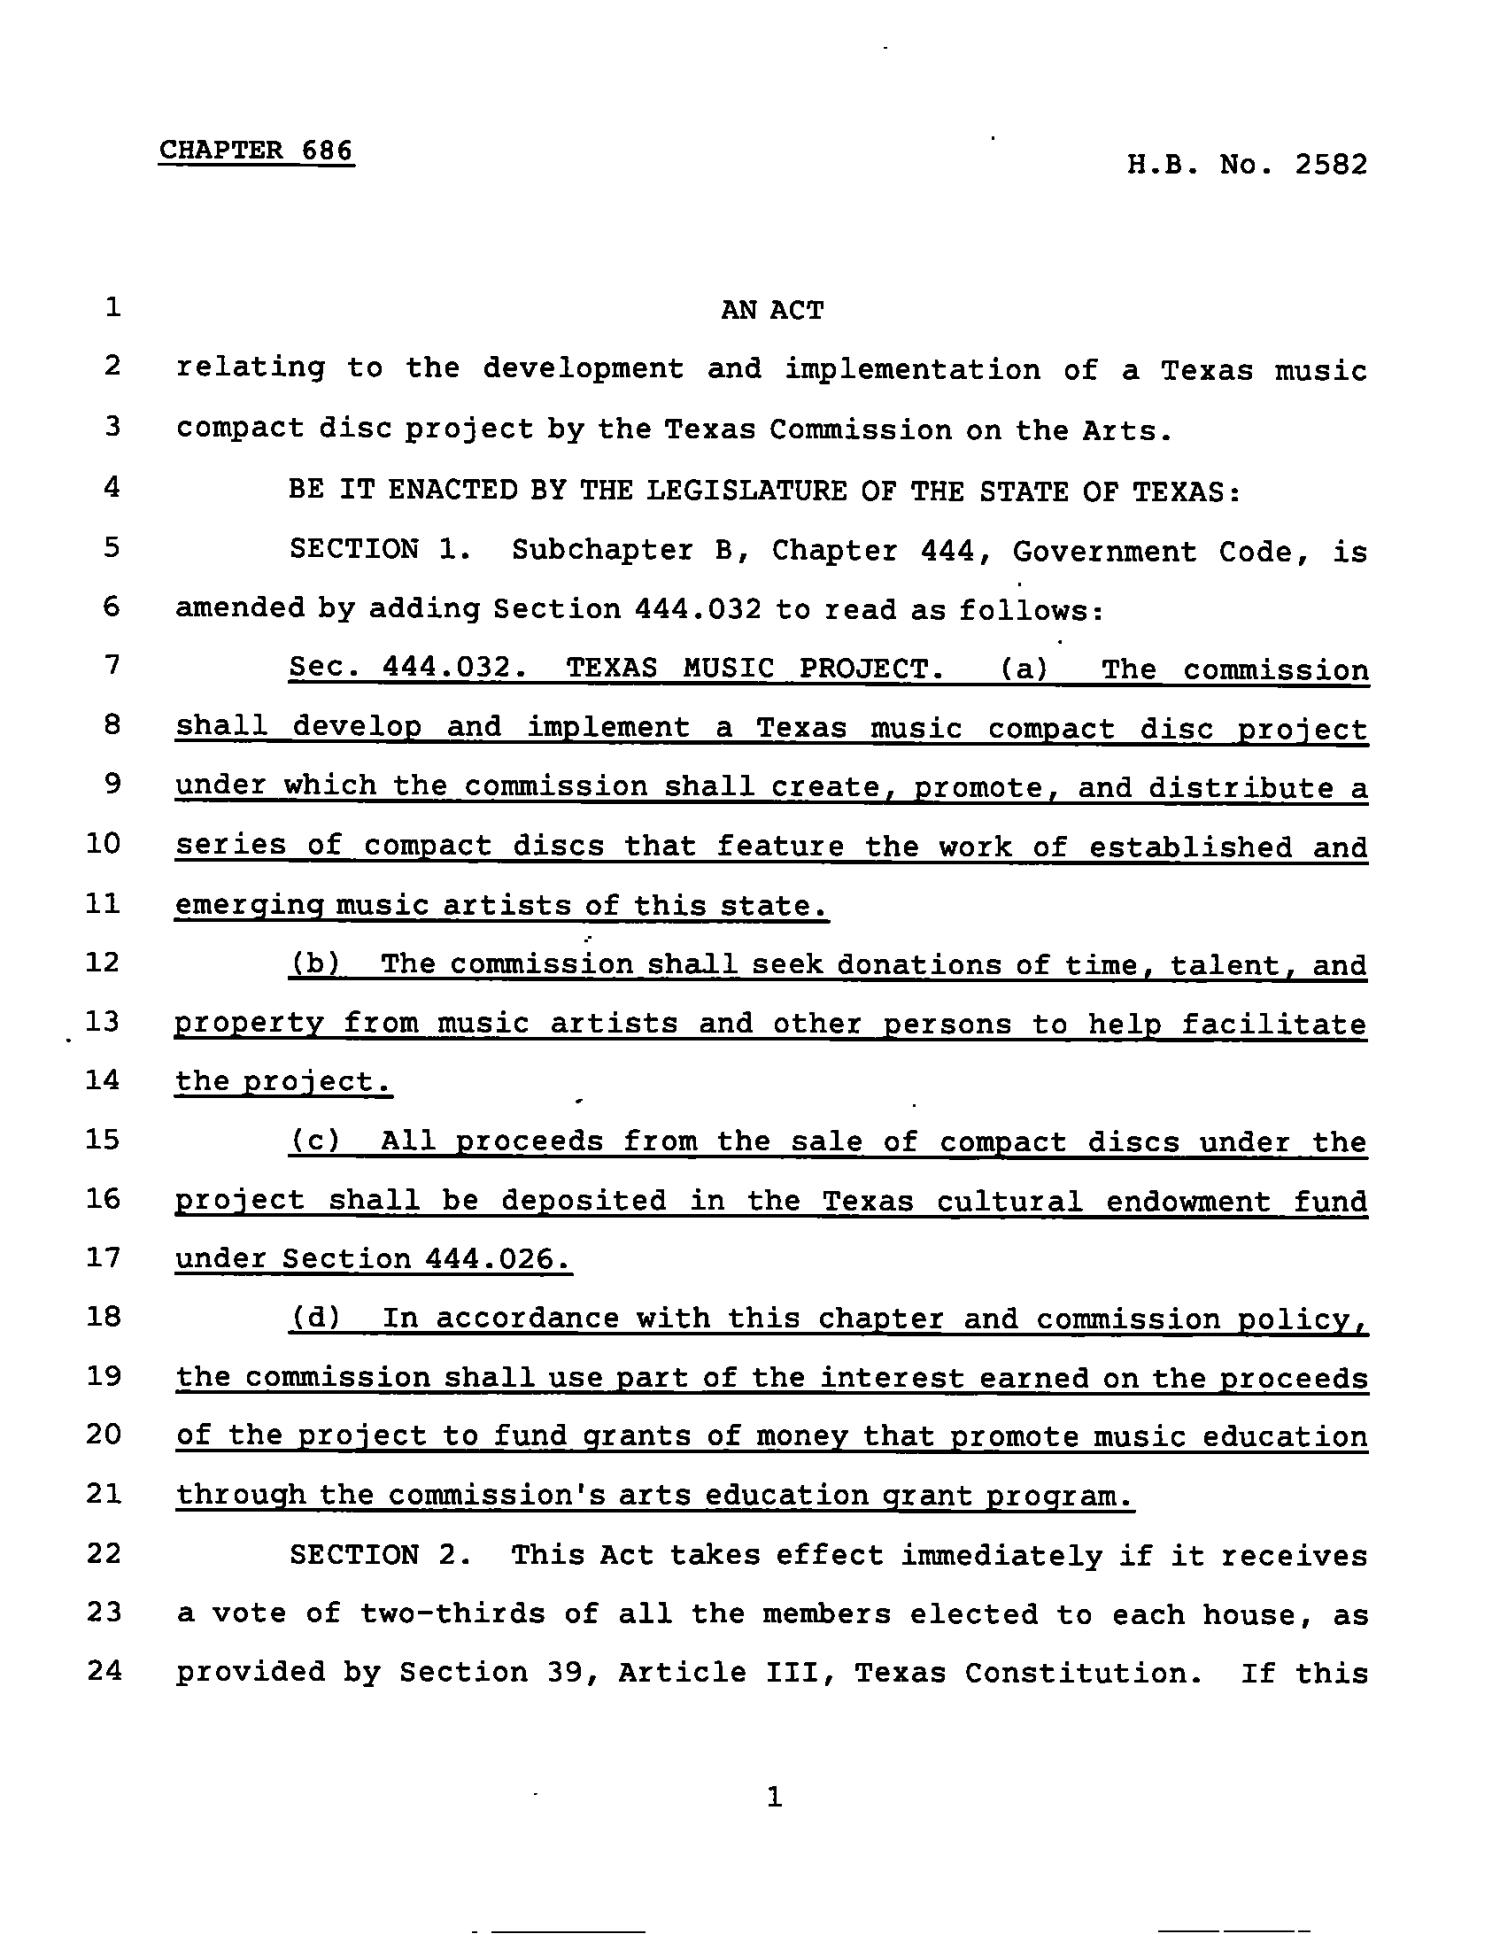 78th Texas Legislature, Regular Session, House Bill 2582, Chapter 686
                                                
                                                    [Sequence #]: 1 of 3
                                                